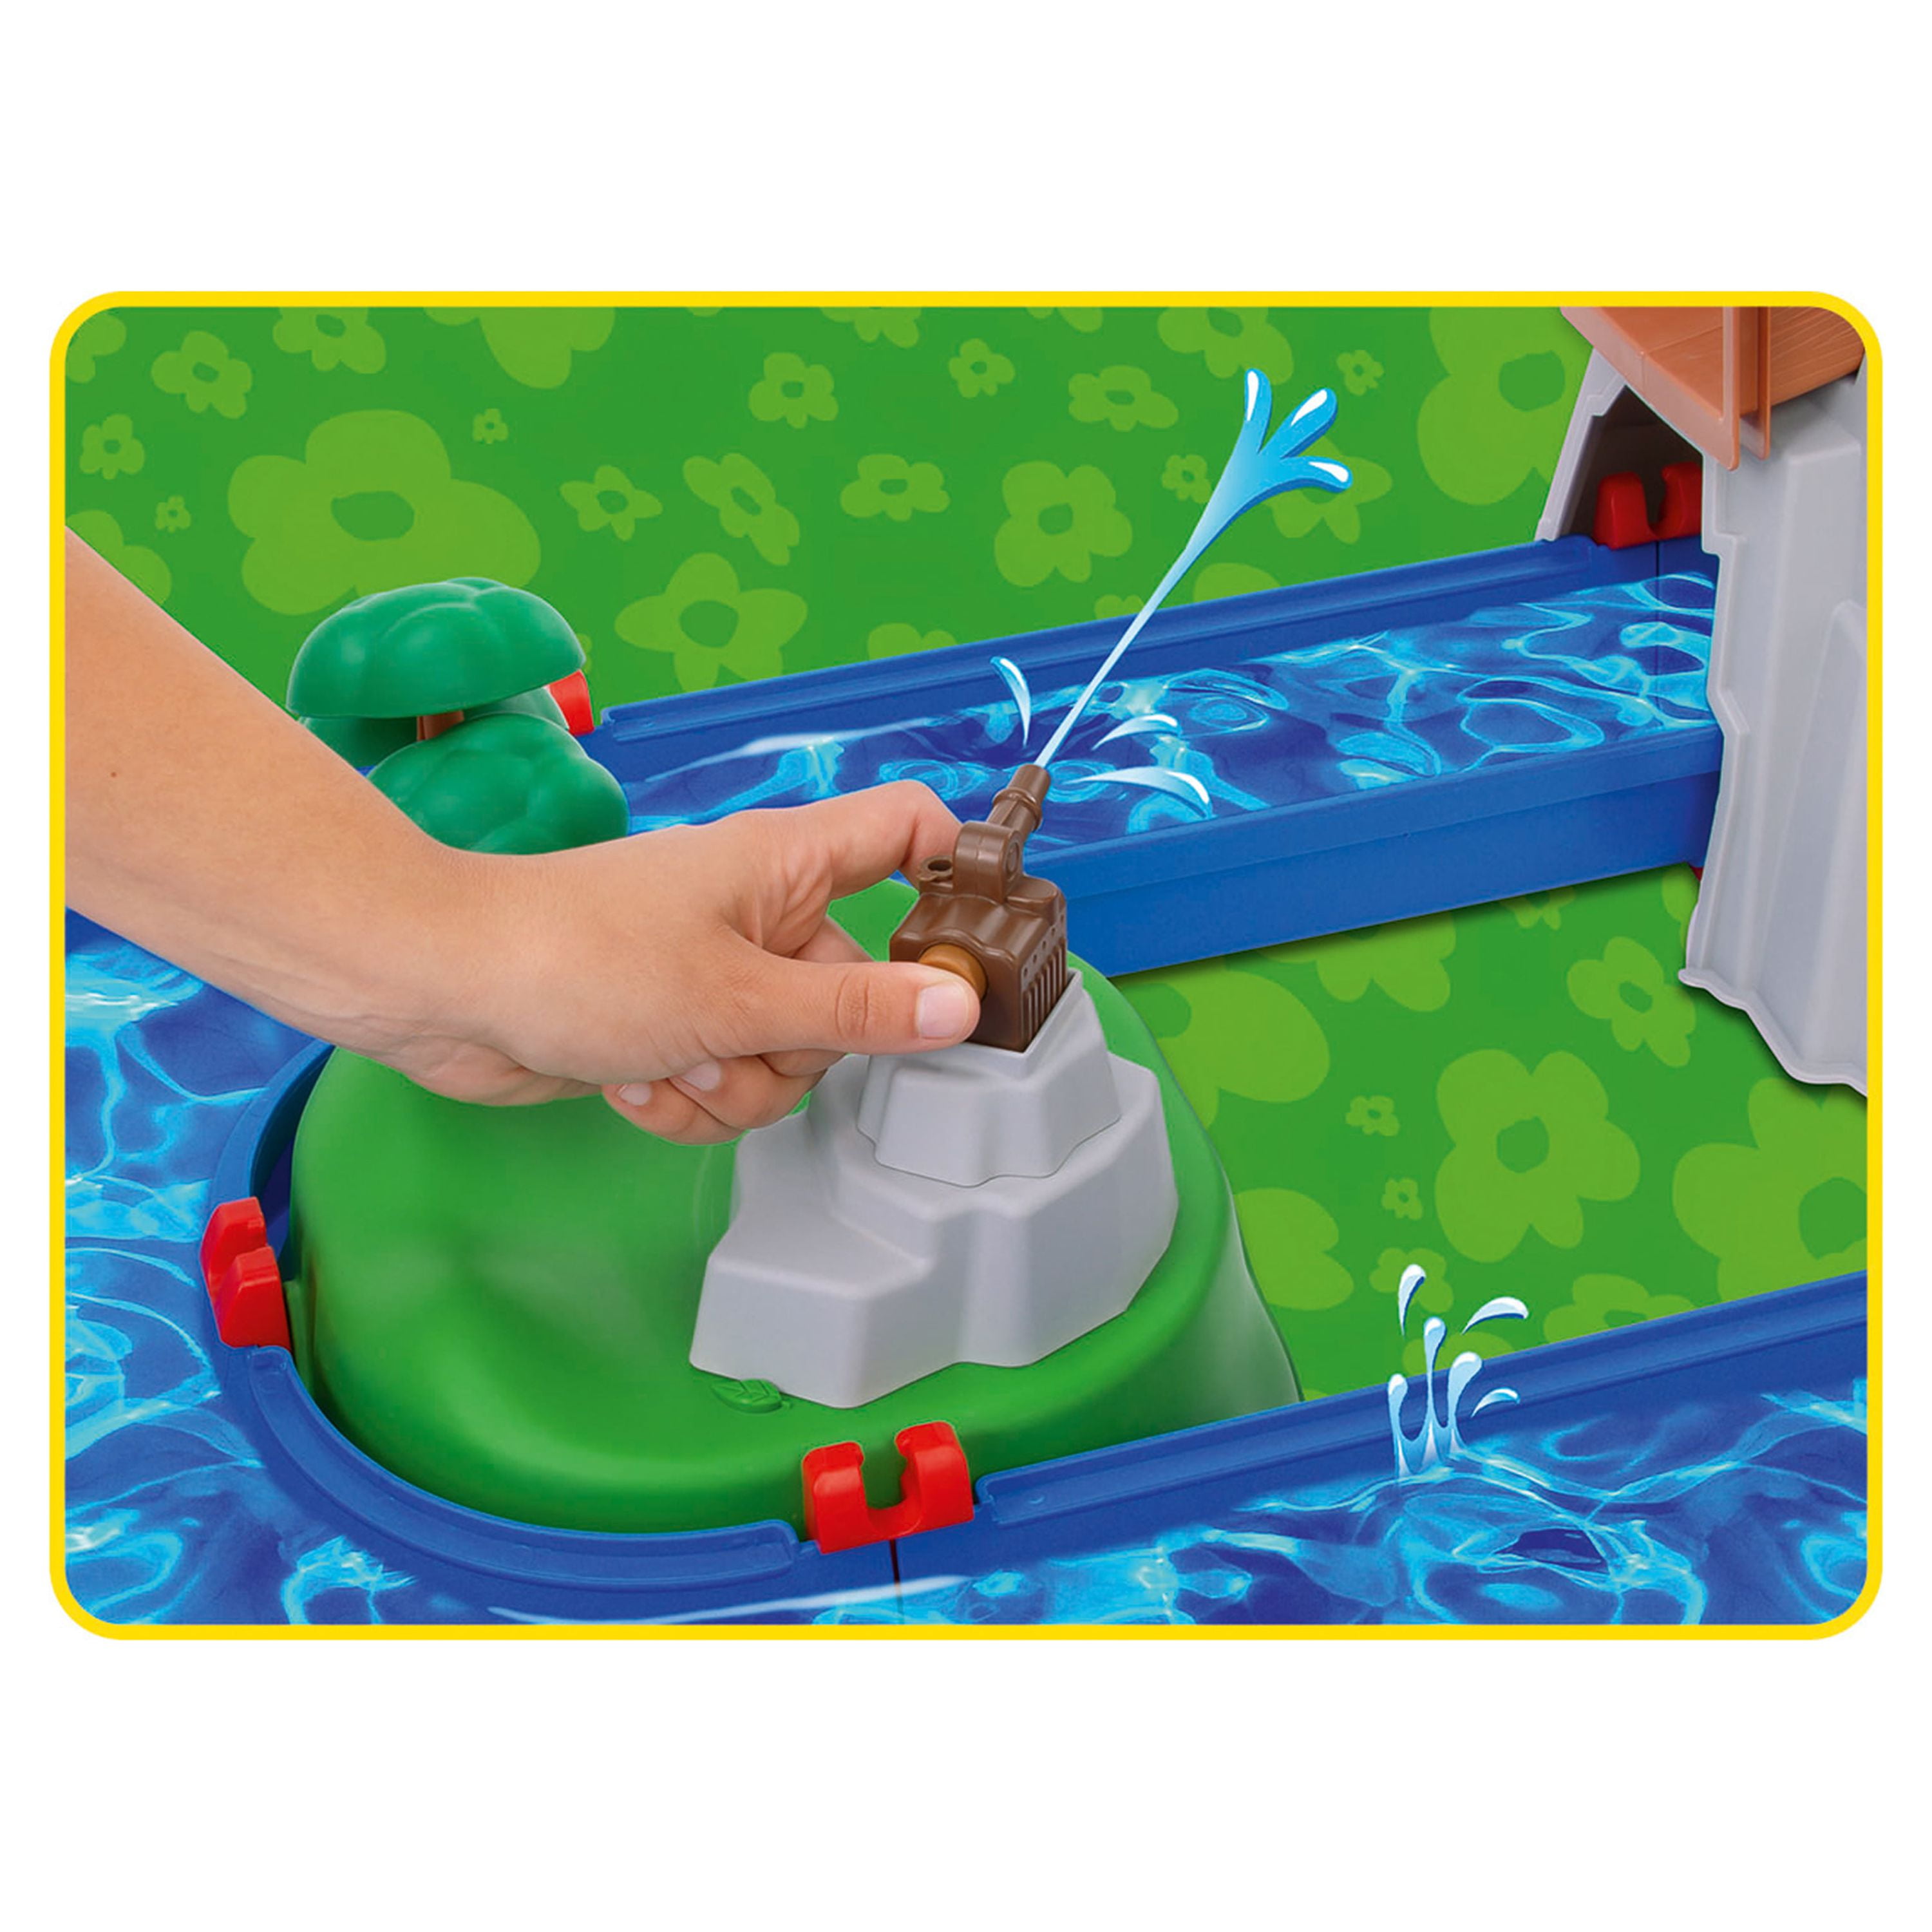 Smoby Aqua Play Mountain Lake - review - The Amazing Adventures of Me